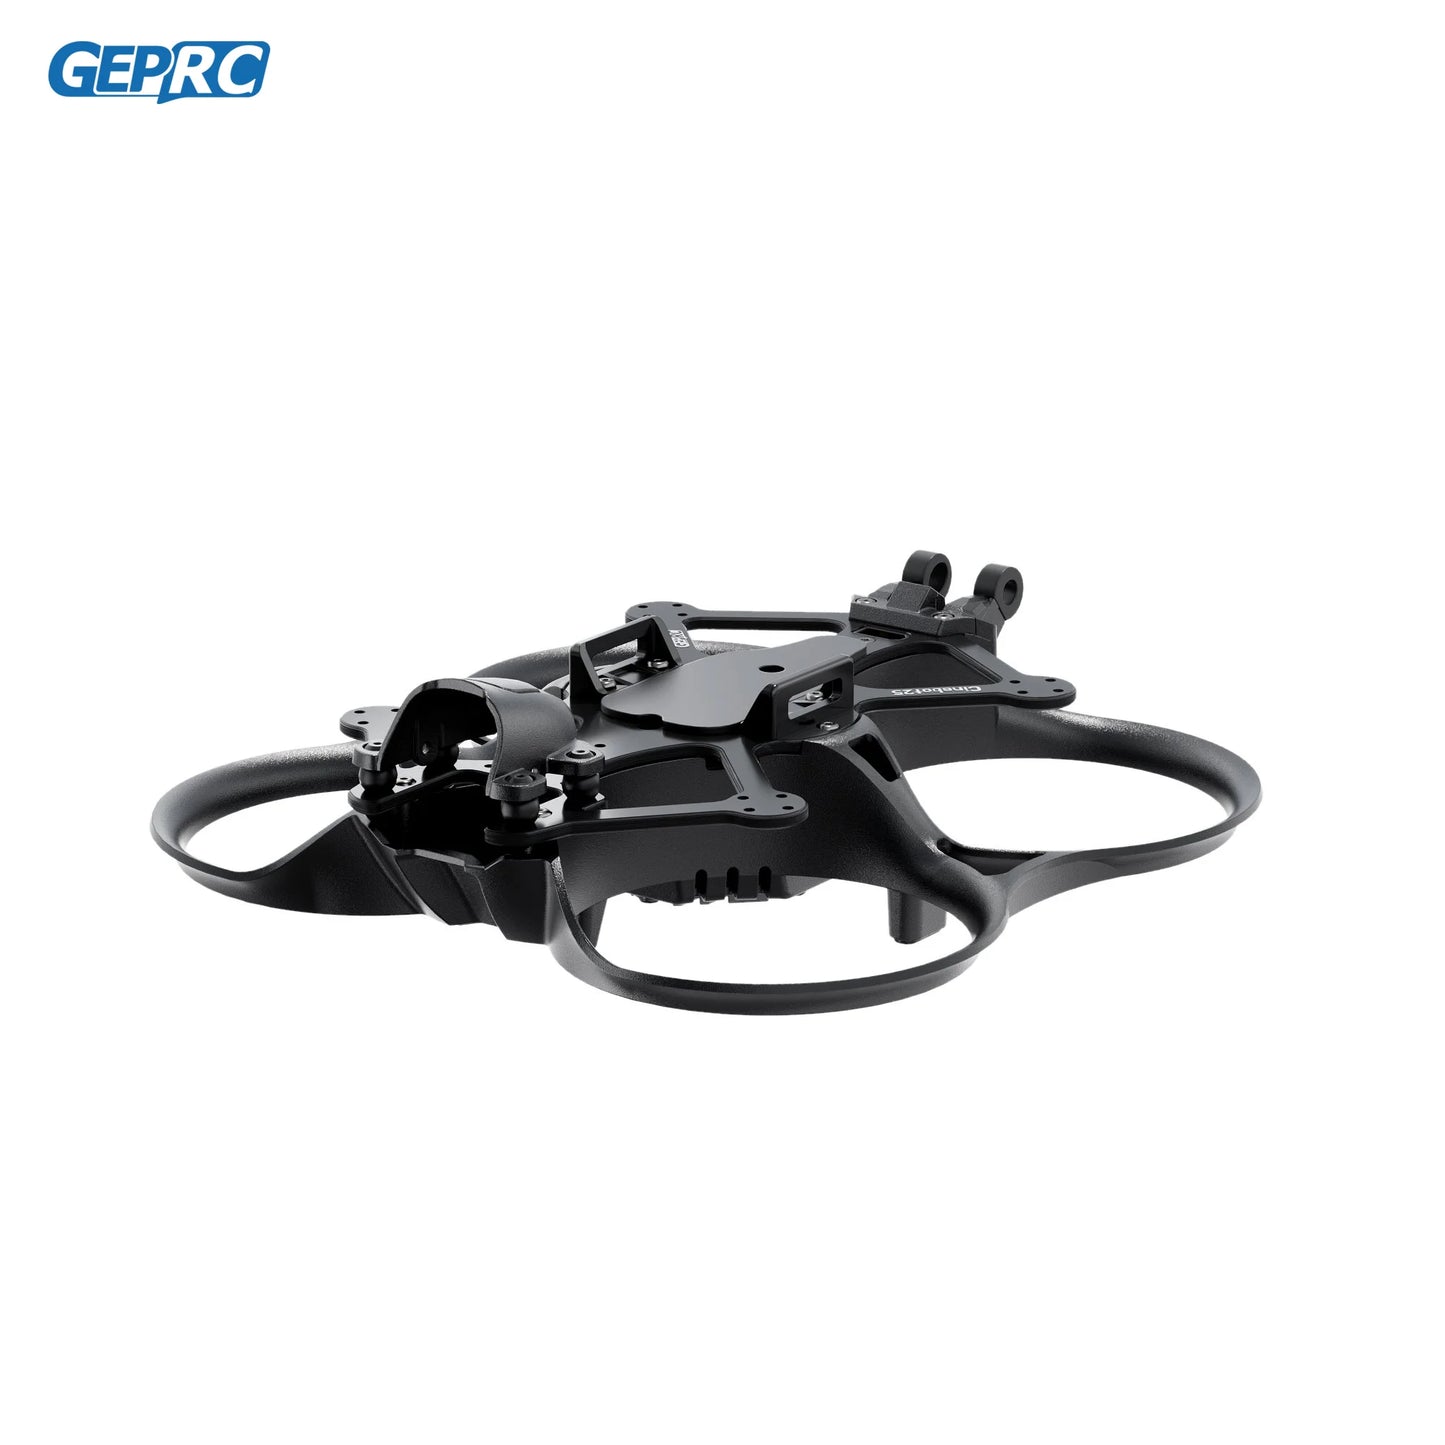 GEPRC GEP-CT25 Frame Parts - Suitable Cinebot25 S 2.5 Inches Replacement Repair Part Injection Molded RC DIY FPV Freestyle Drone